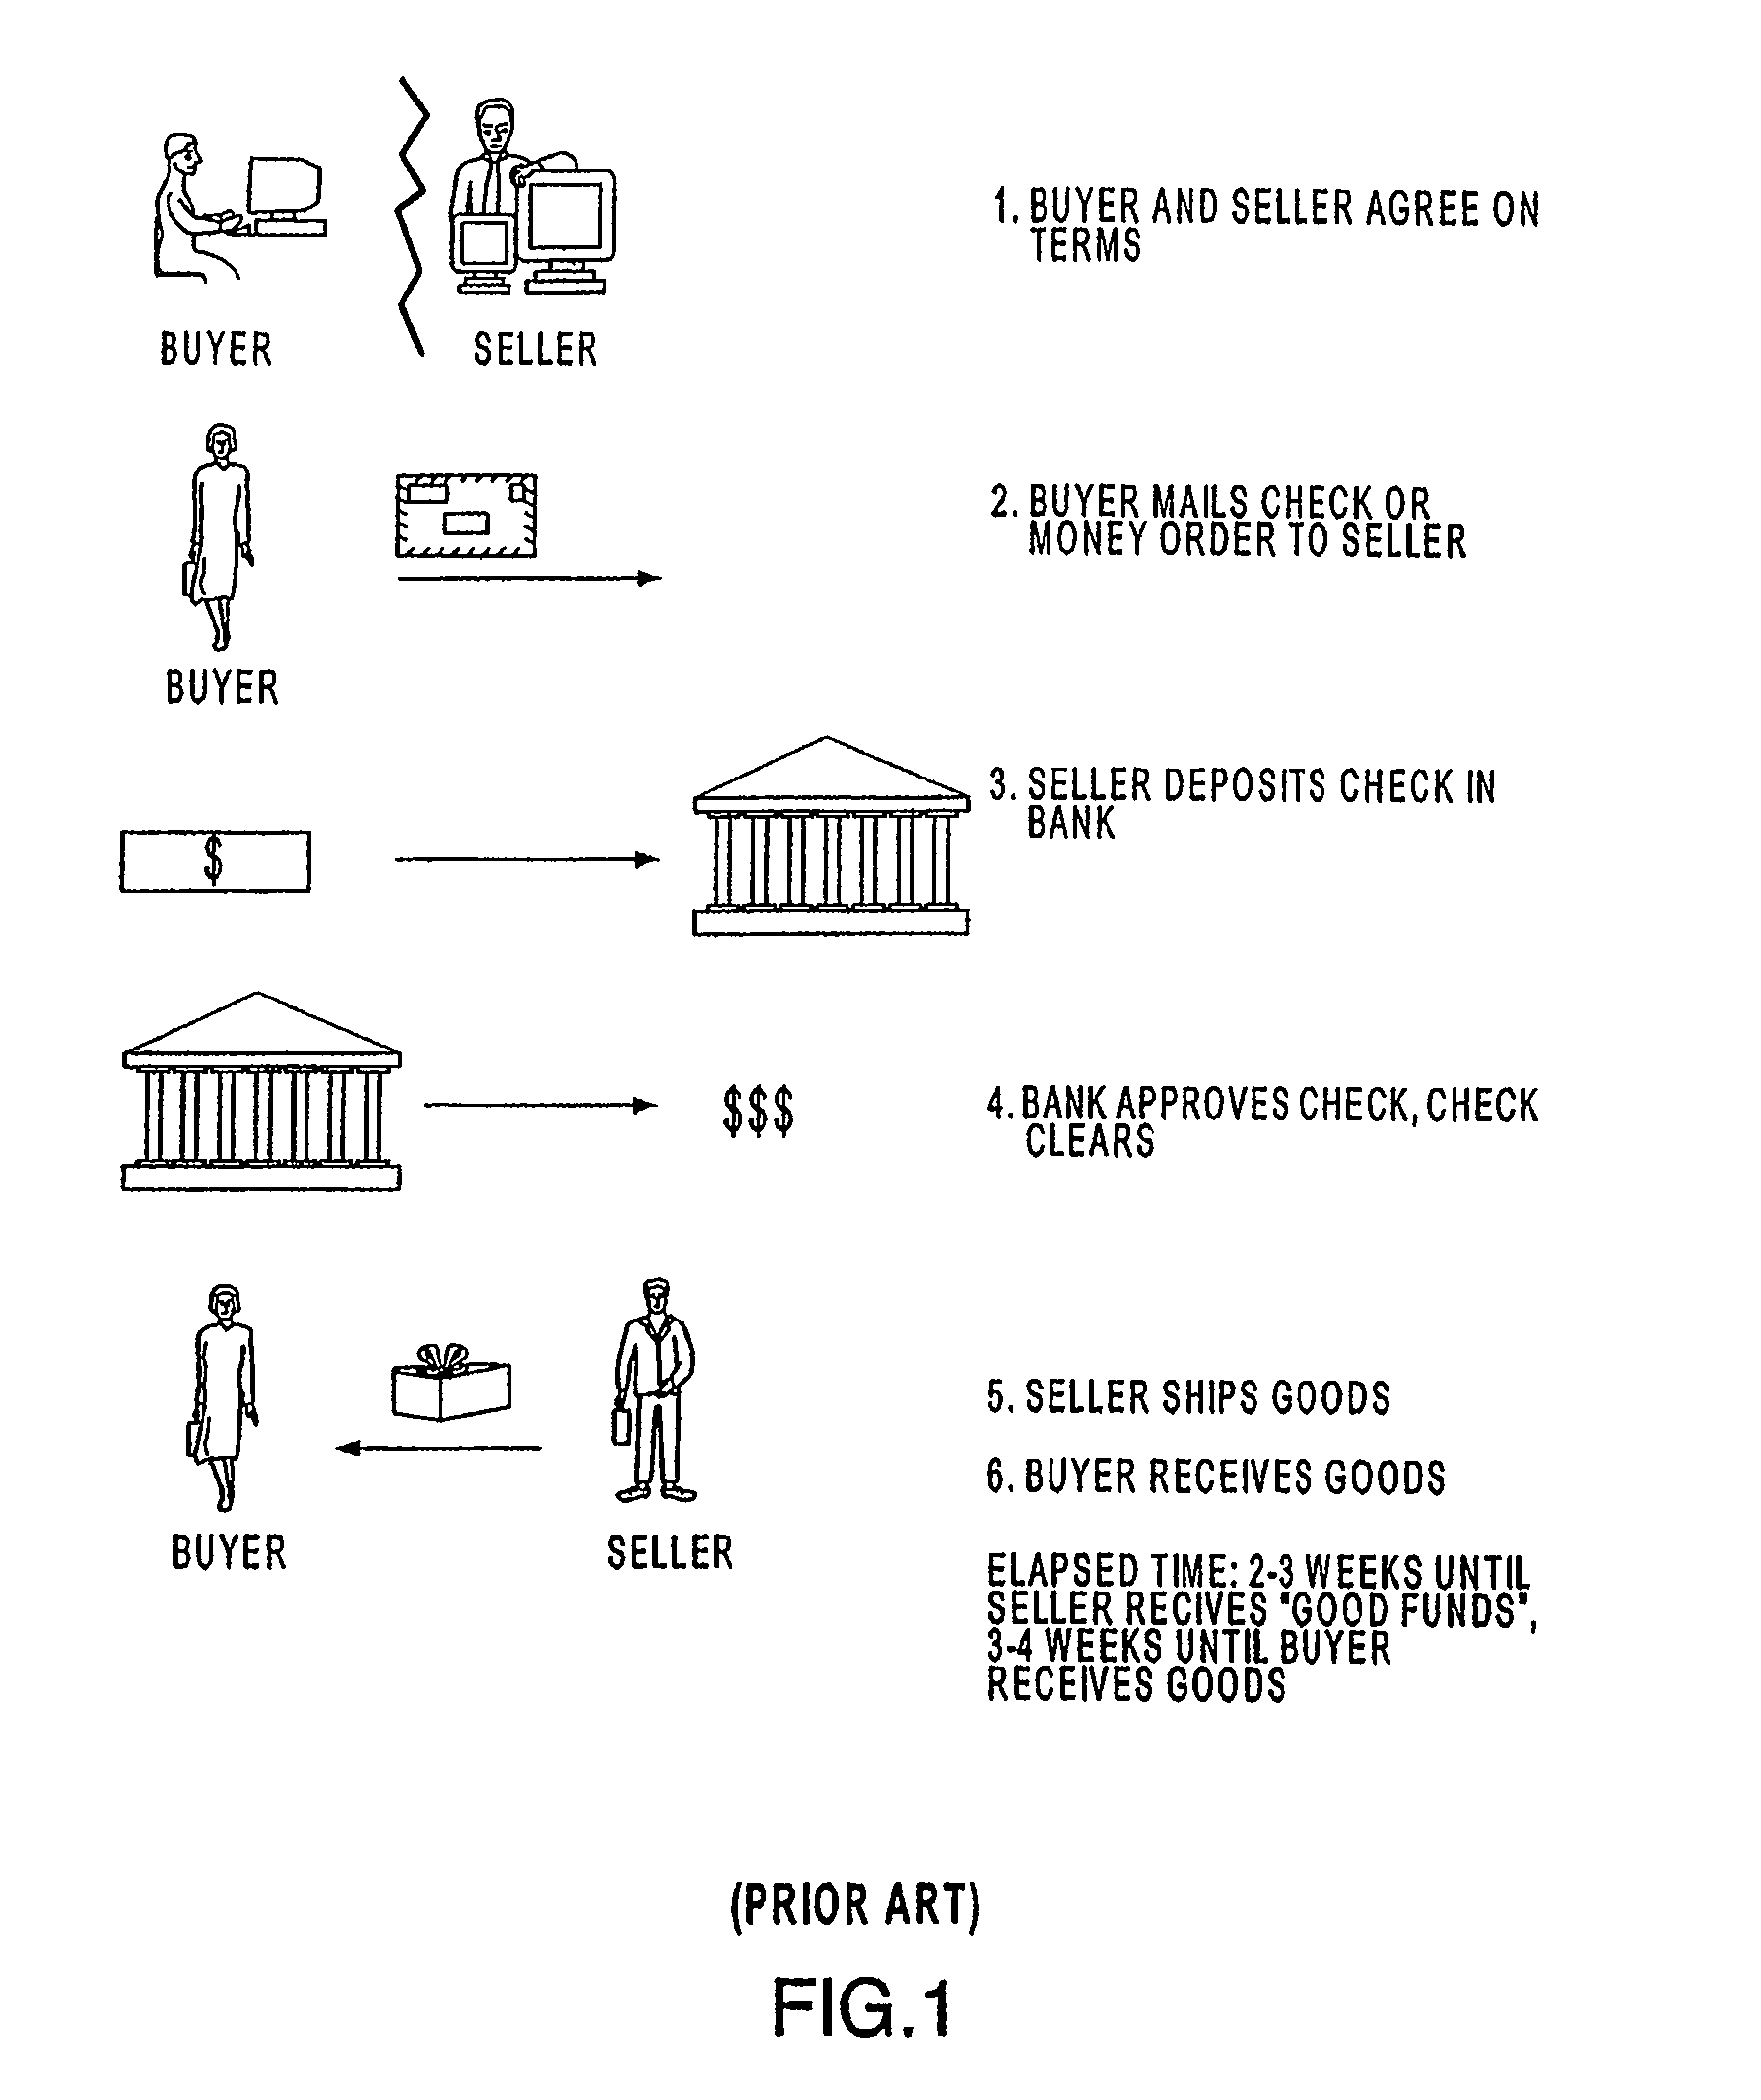 Systems and methods for processing a payment authorization request over disparate payment networks